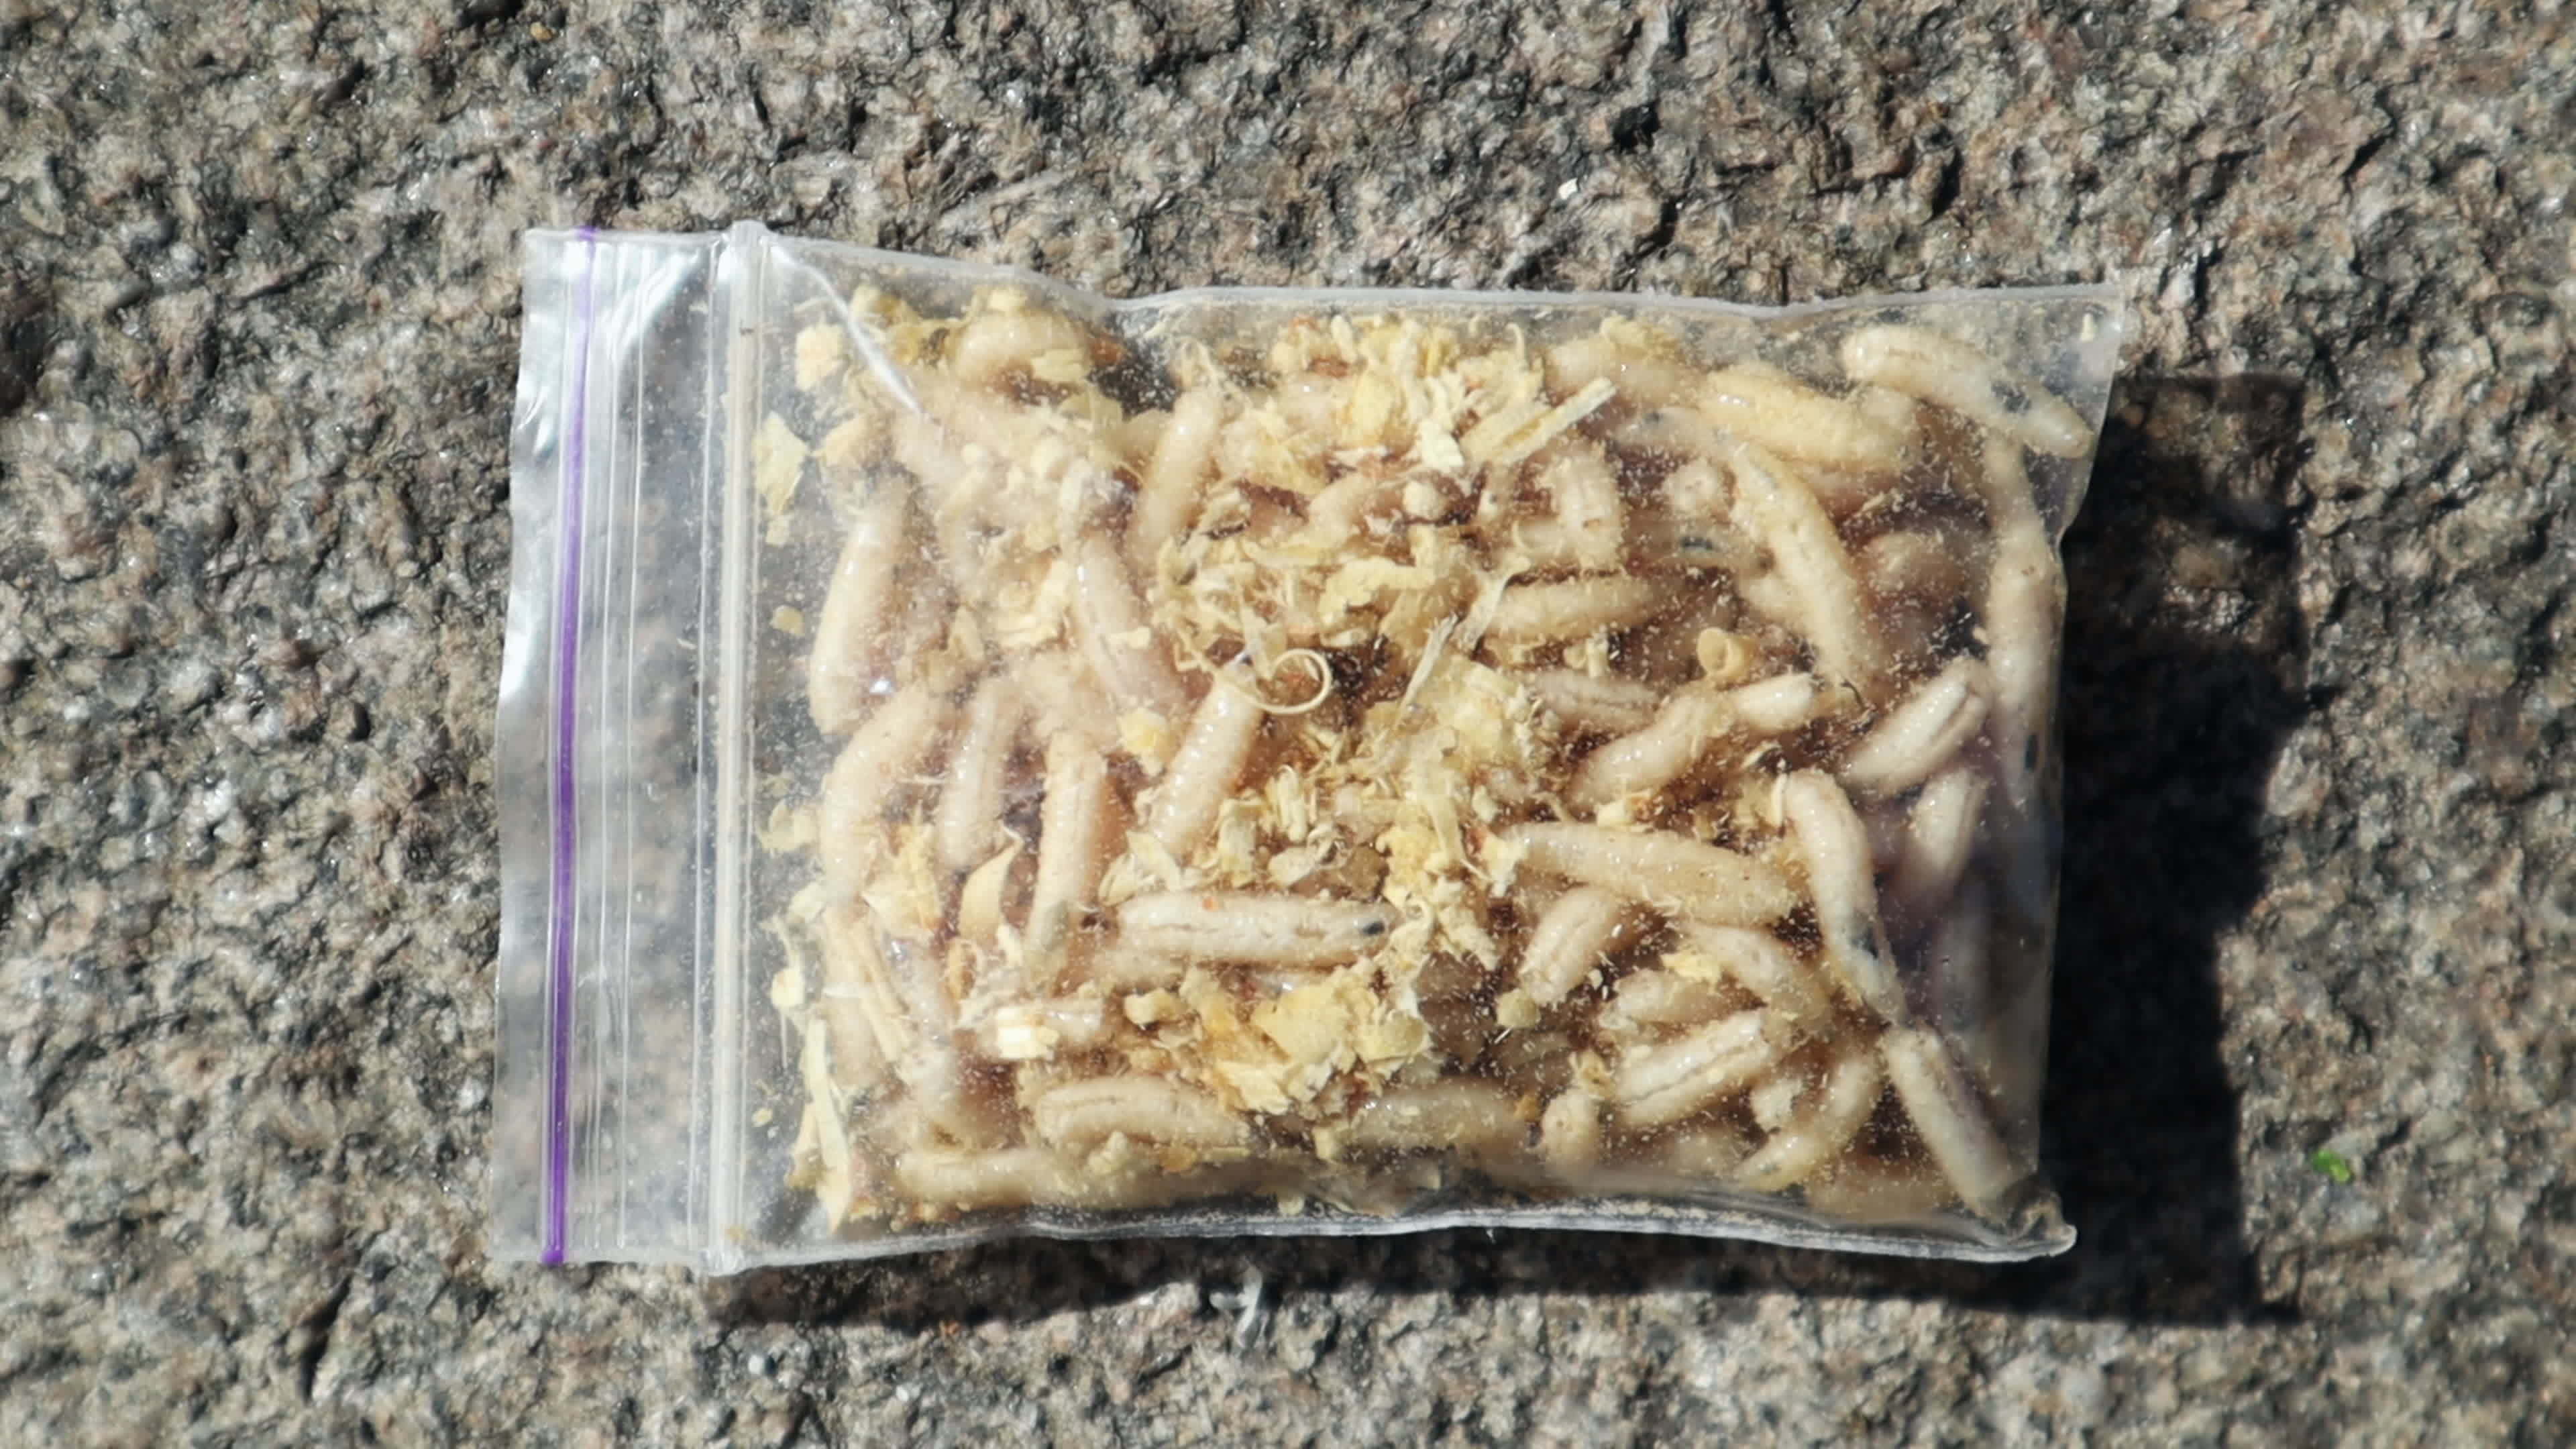 https://static.vecteezy.com/system/resources/thumbnails/017/629/890/original/transparent-bag-with-live-larvae-groups-of-white-worm-fly-larvae-move-crawl-in-a-bag-of-sawdust-shimmering-in-the-sun-bait-for-fish-fishing-juicy-tasty-maggots-are-the-best-bait-for-catching-video.jpg